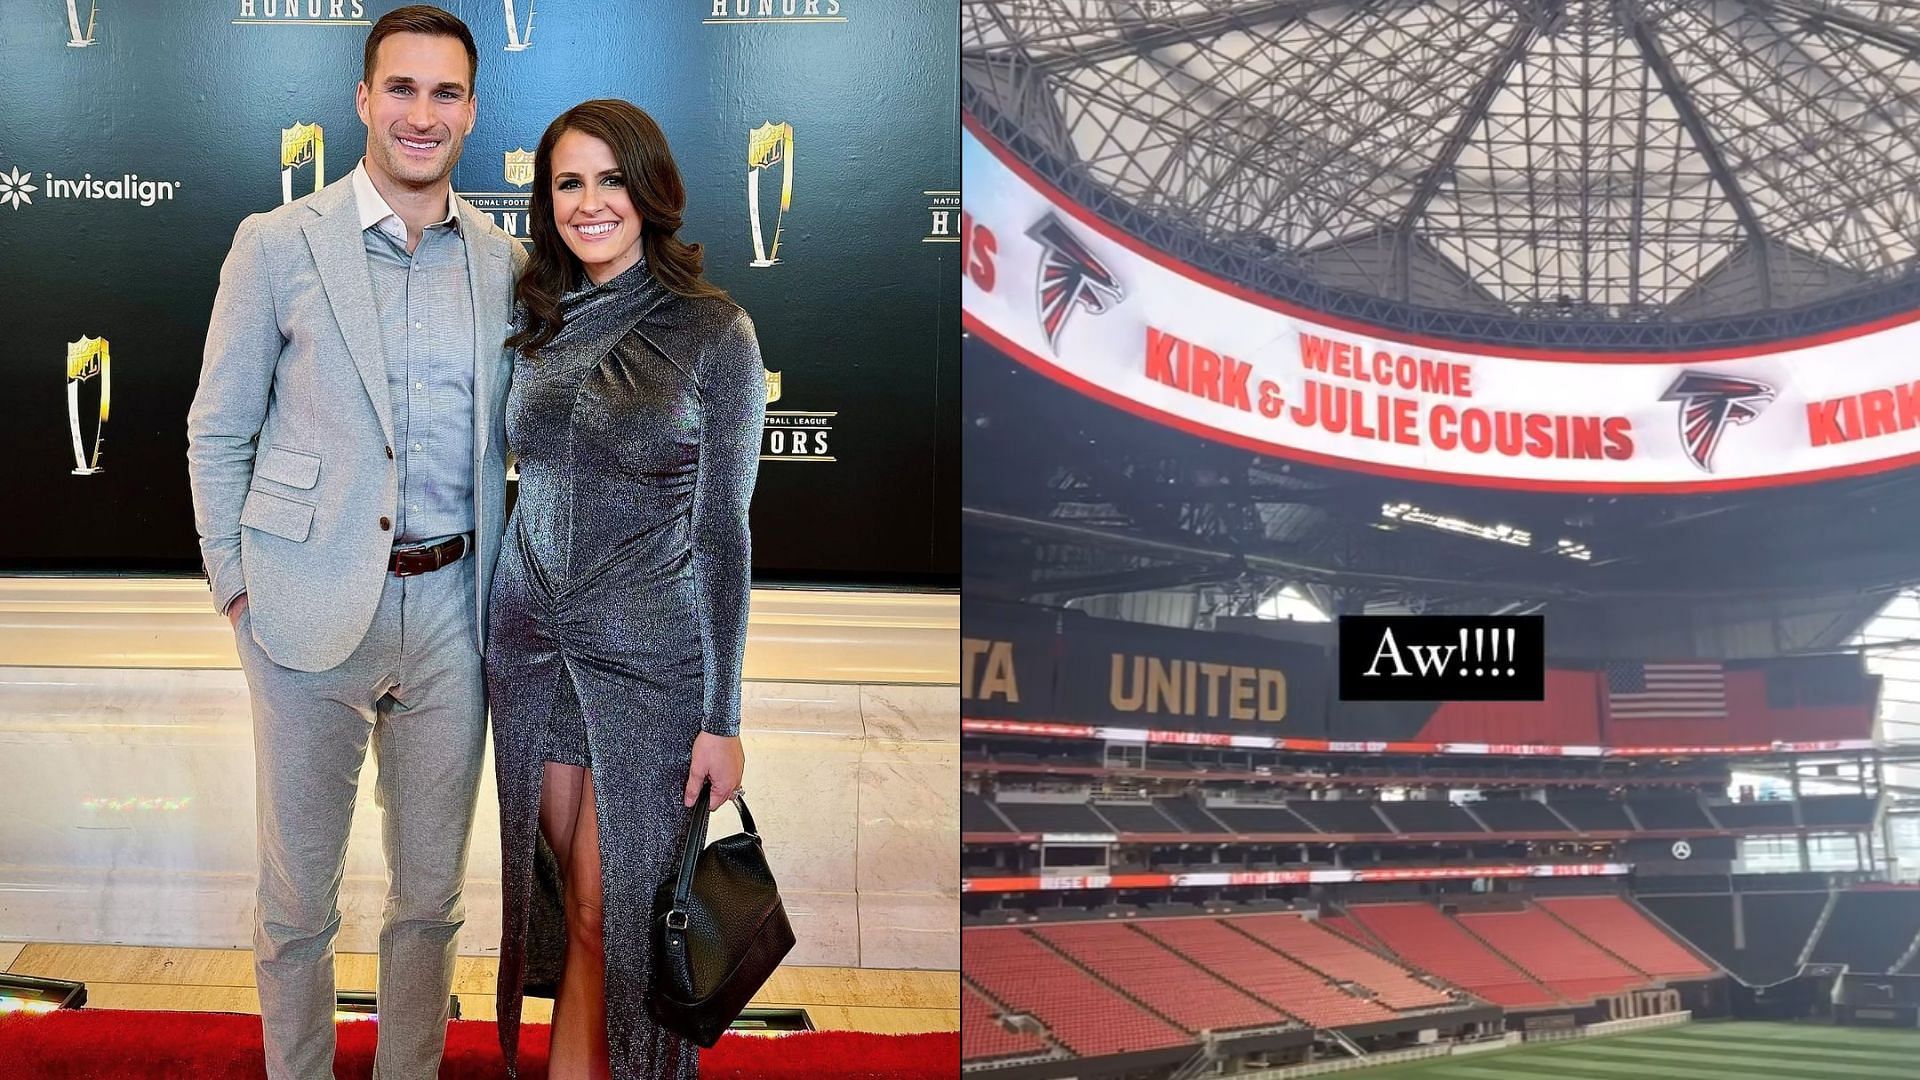 The Atlanta Falcons welcome Kirk Cousins and his wife Julie to Mercedes-Benz Stadium